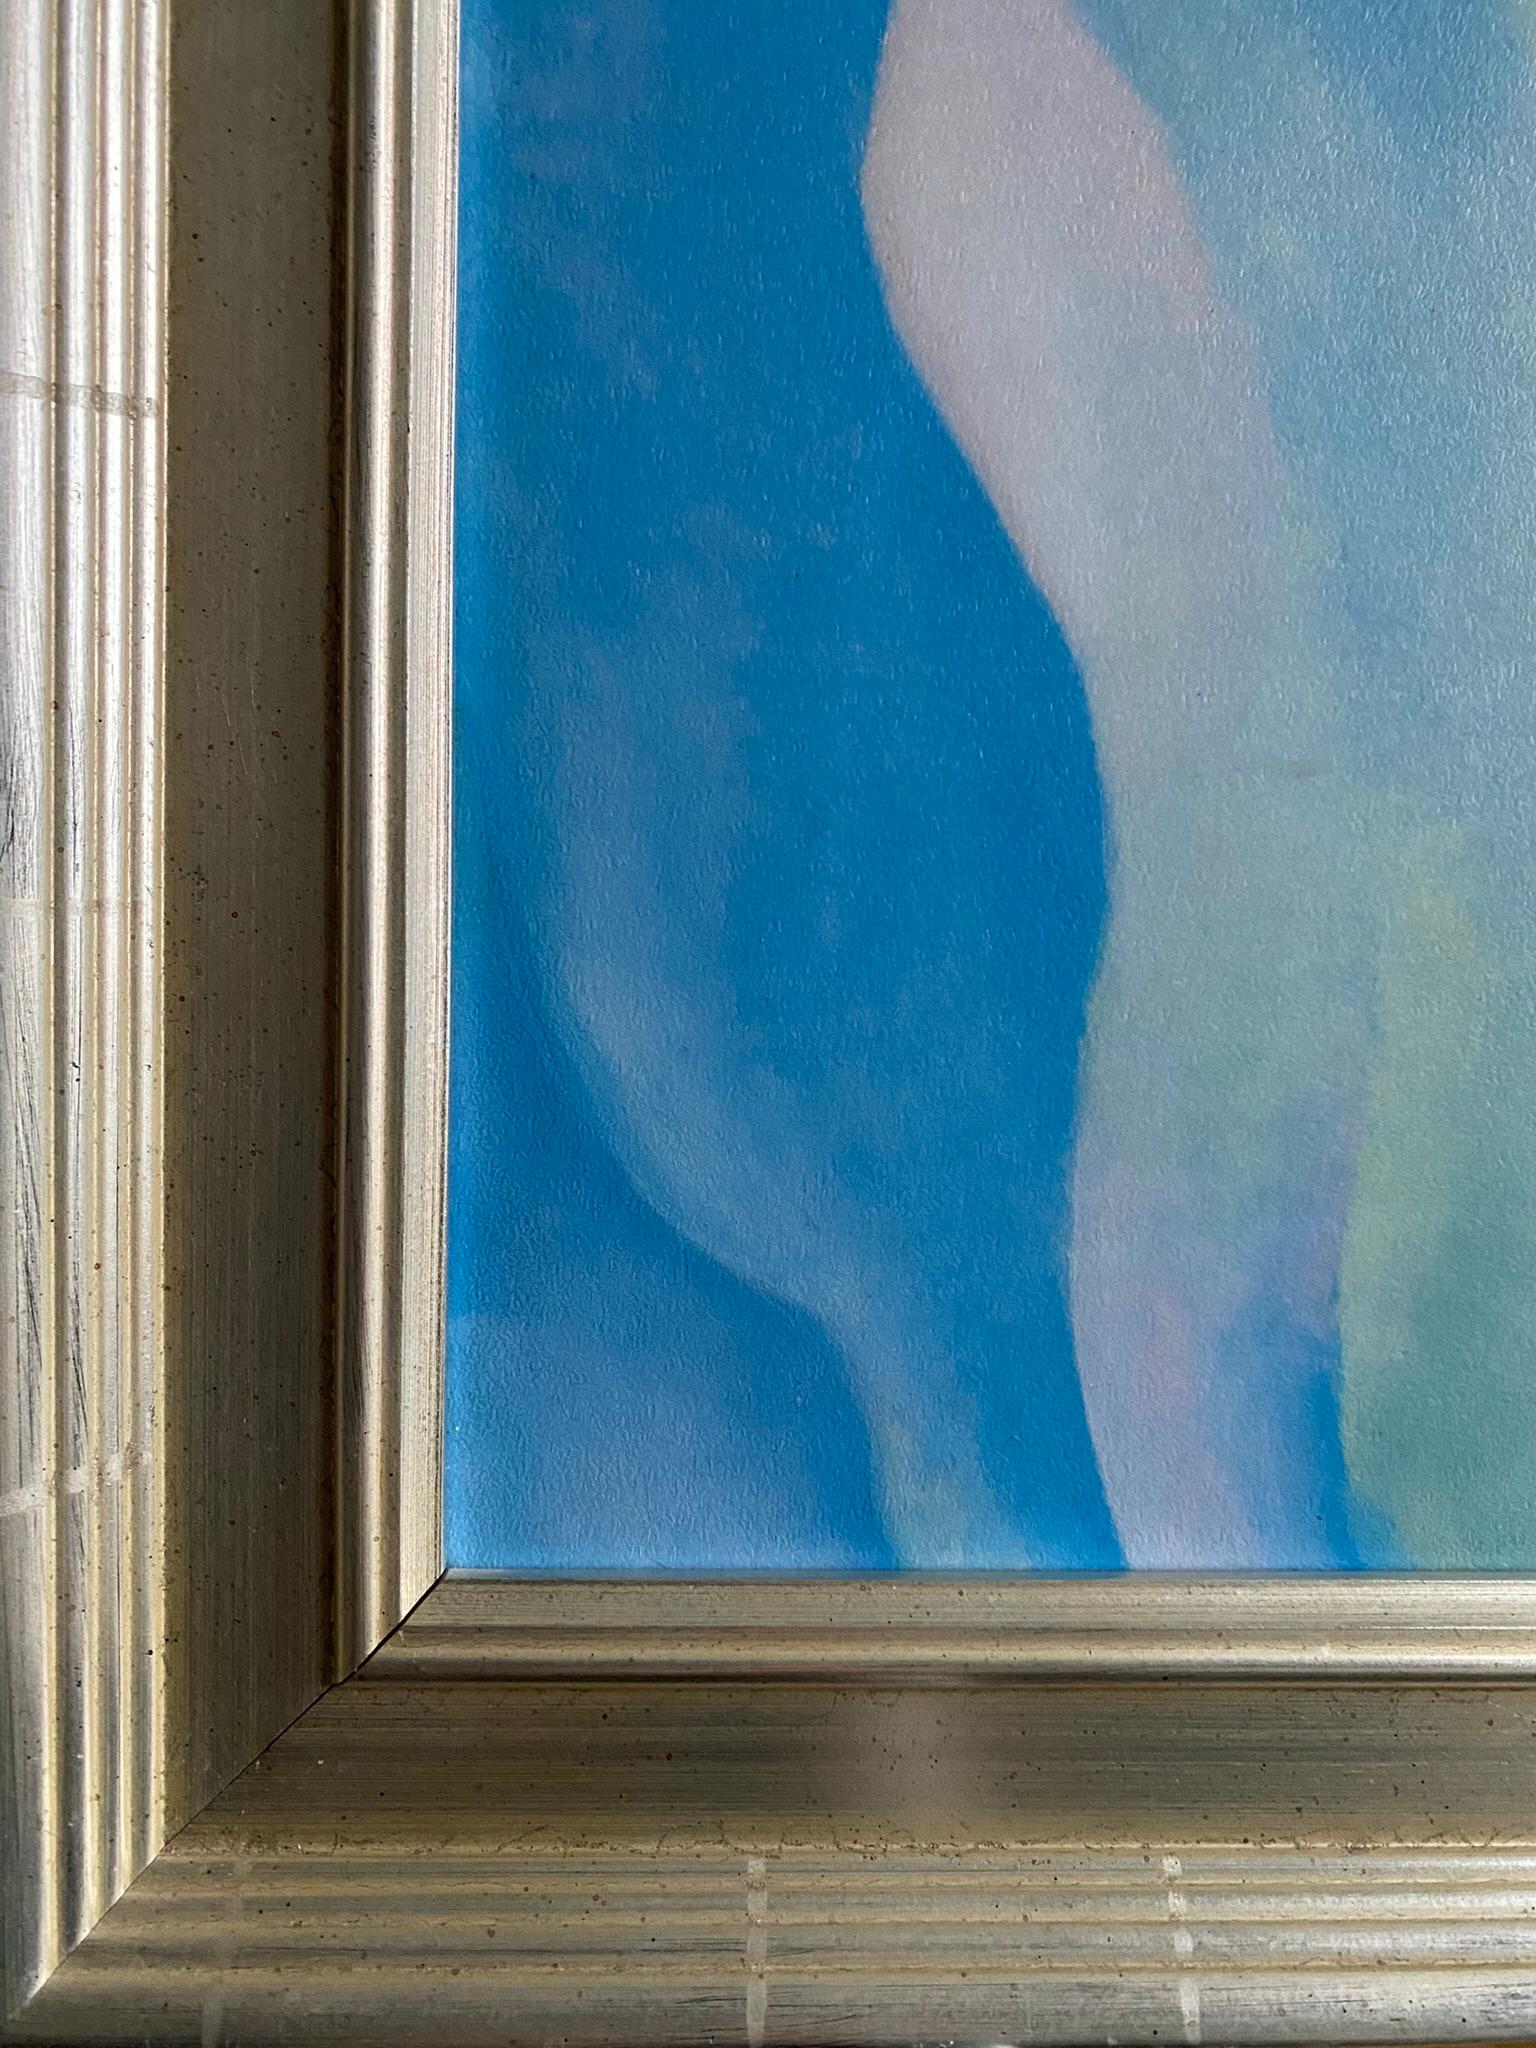 Georgia O'Keeffe-High Quality print by MoMA circa1997-Abstraction Blue-GSYStudio For Sale 9